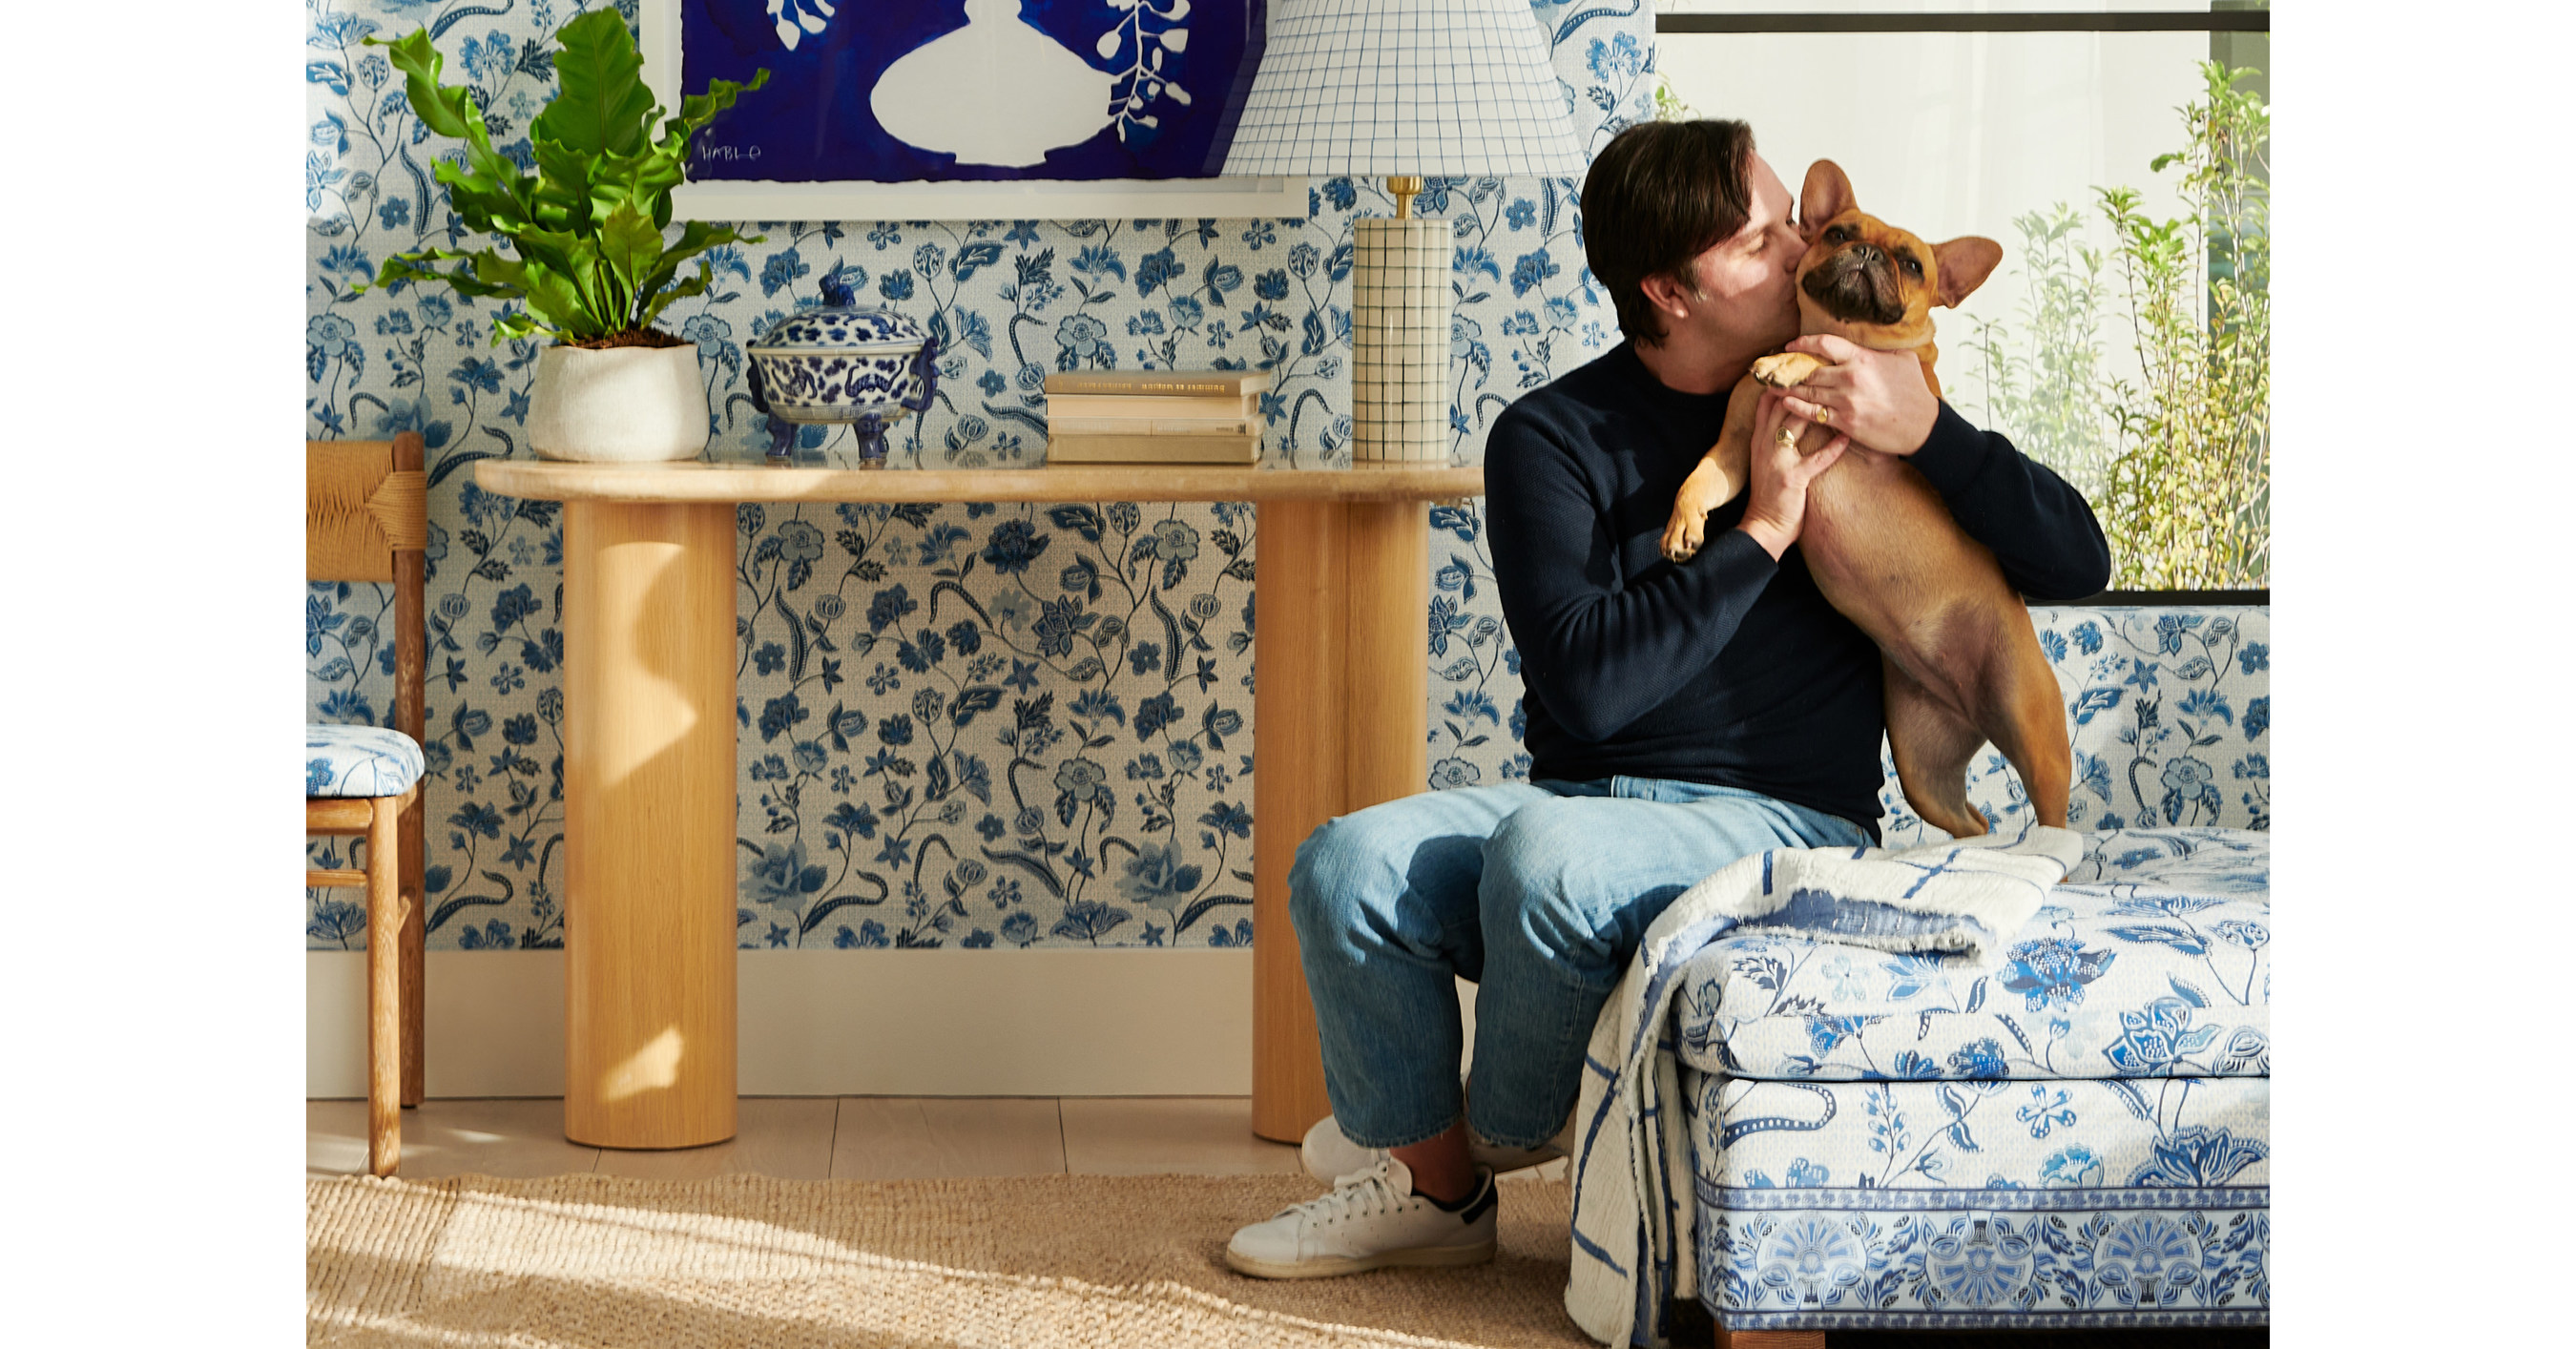 Anthropologie Announces Exclusive Home Collaboration with Esteemed Designer Mark D. Sikes